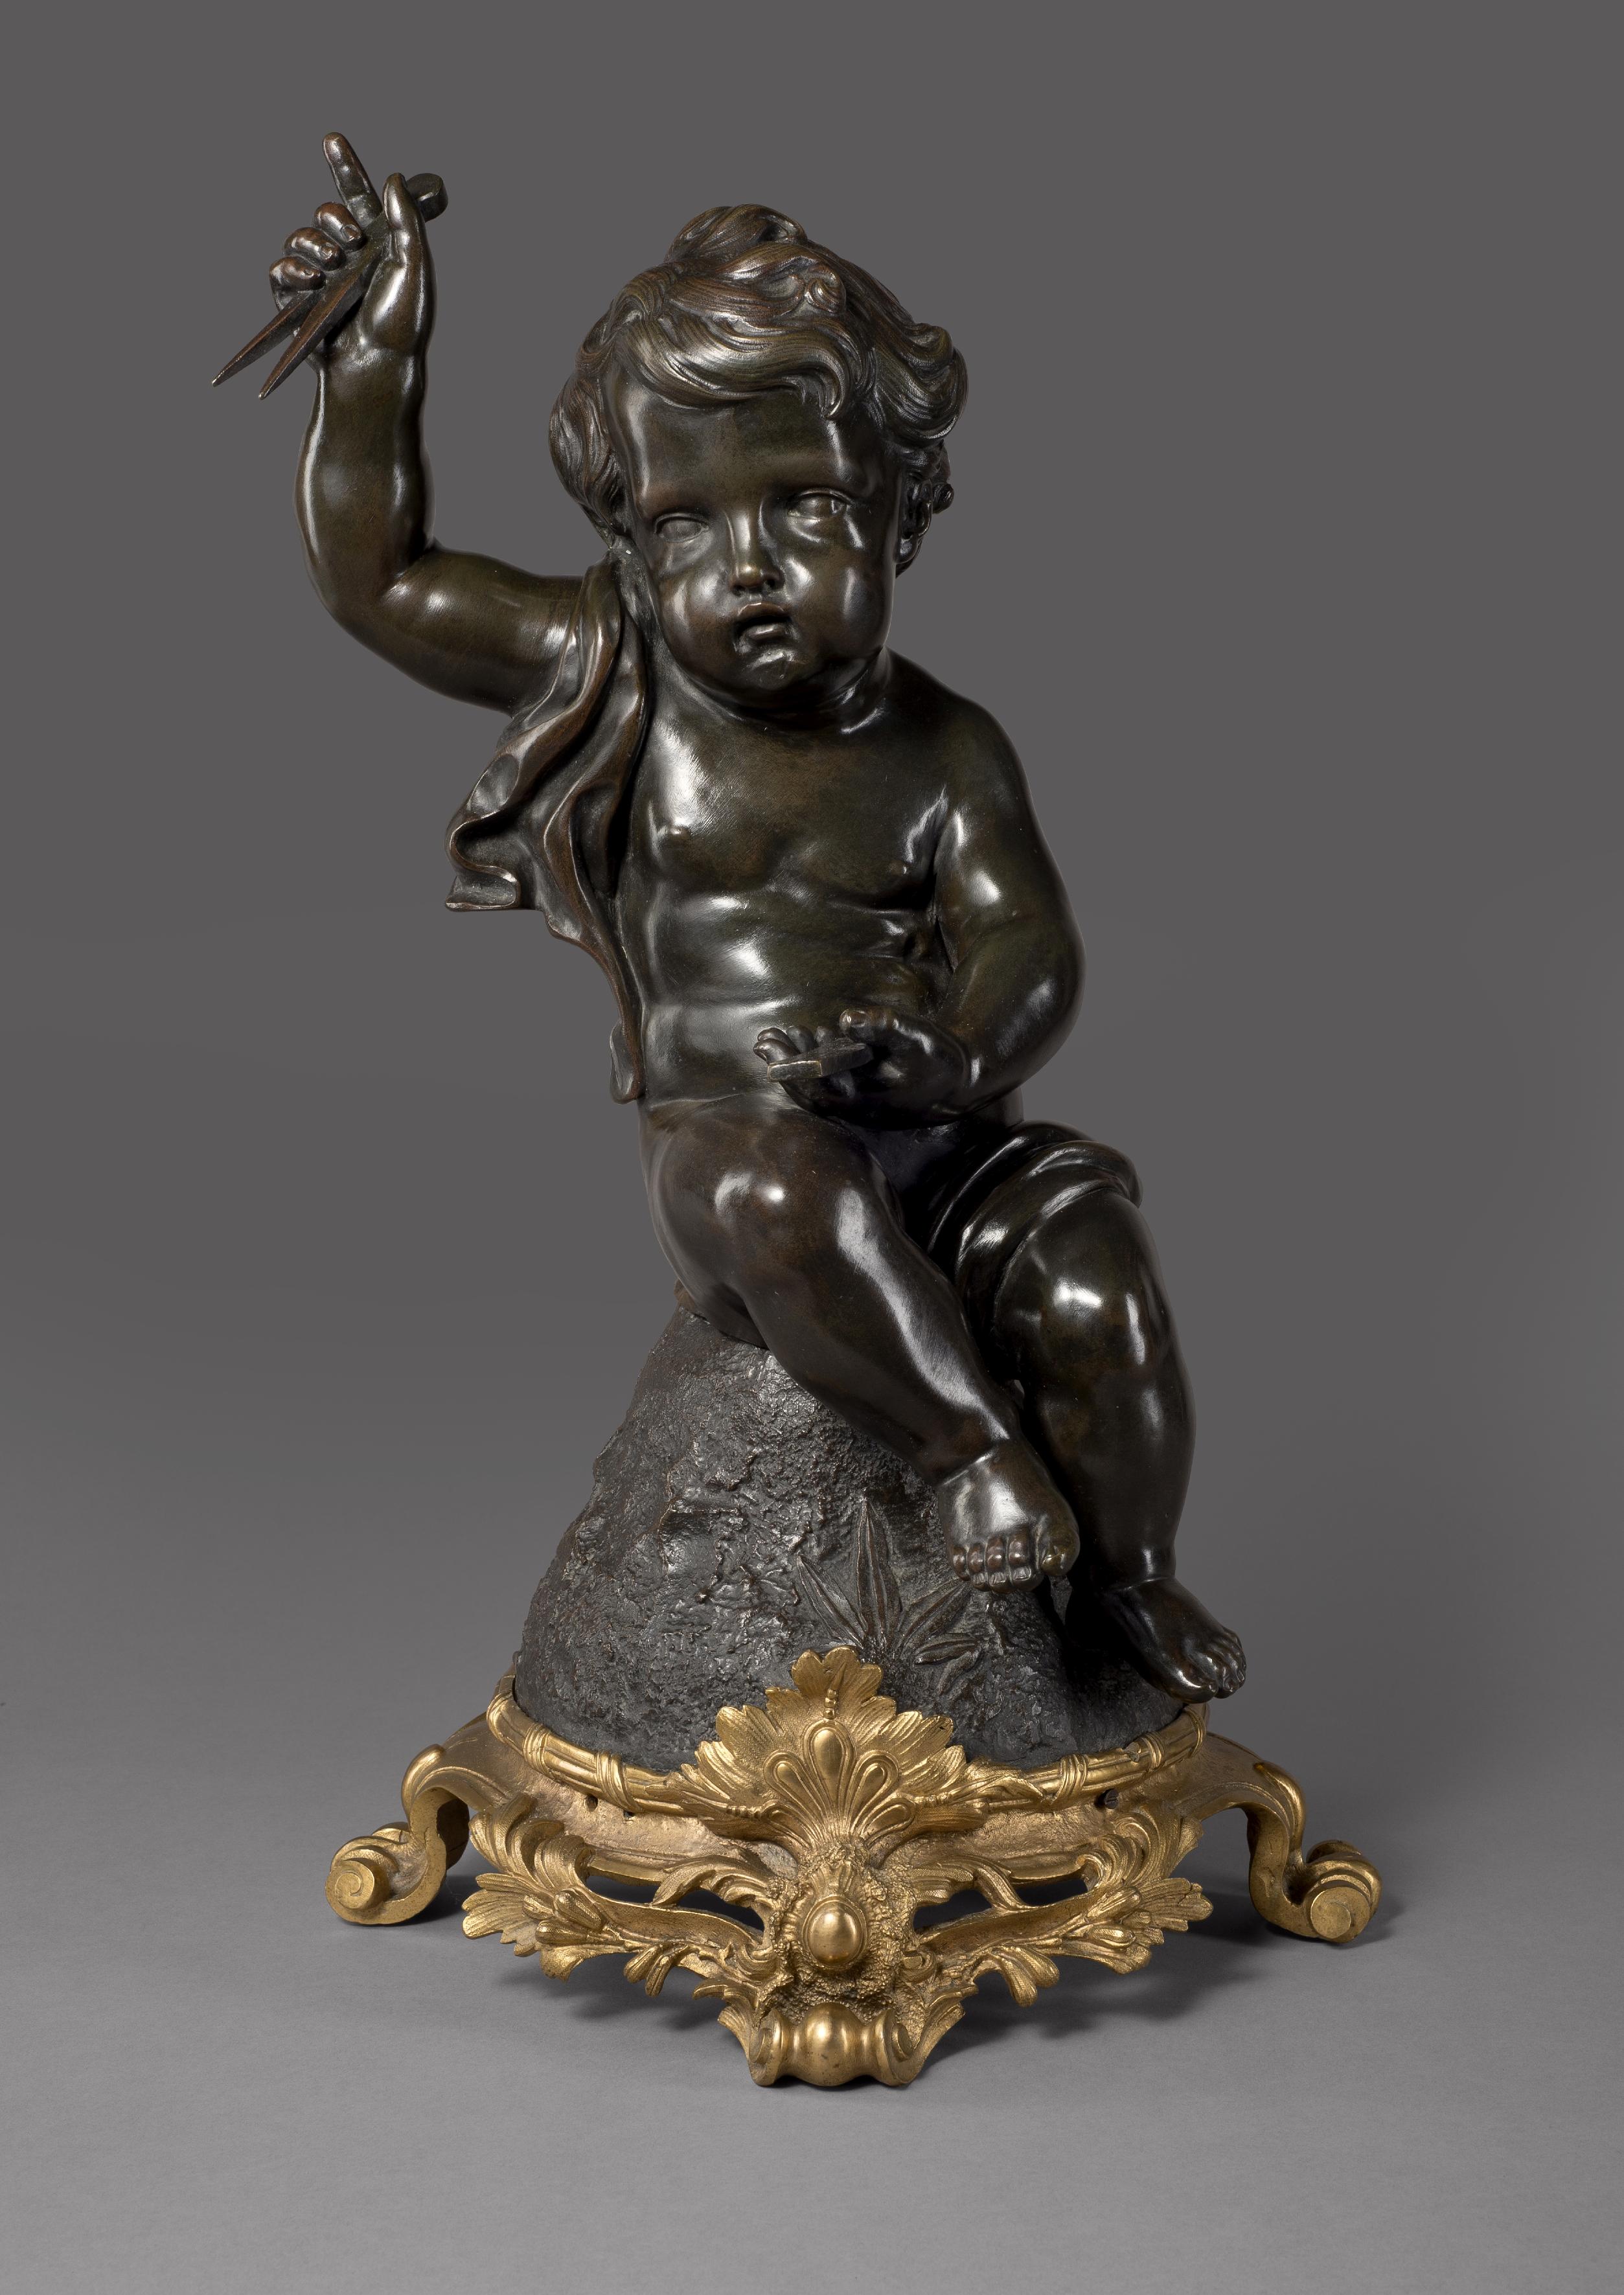 A fine patinated bronze Putto figure emblematic of architecture, after Claude Michel Clodion.

French, circa 1890. 

Standing at 55 cm (22 inches) tall this finely cast and modelled putto figure is seated on a naturalistic rocky outcrop and